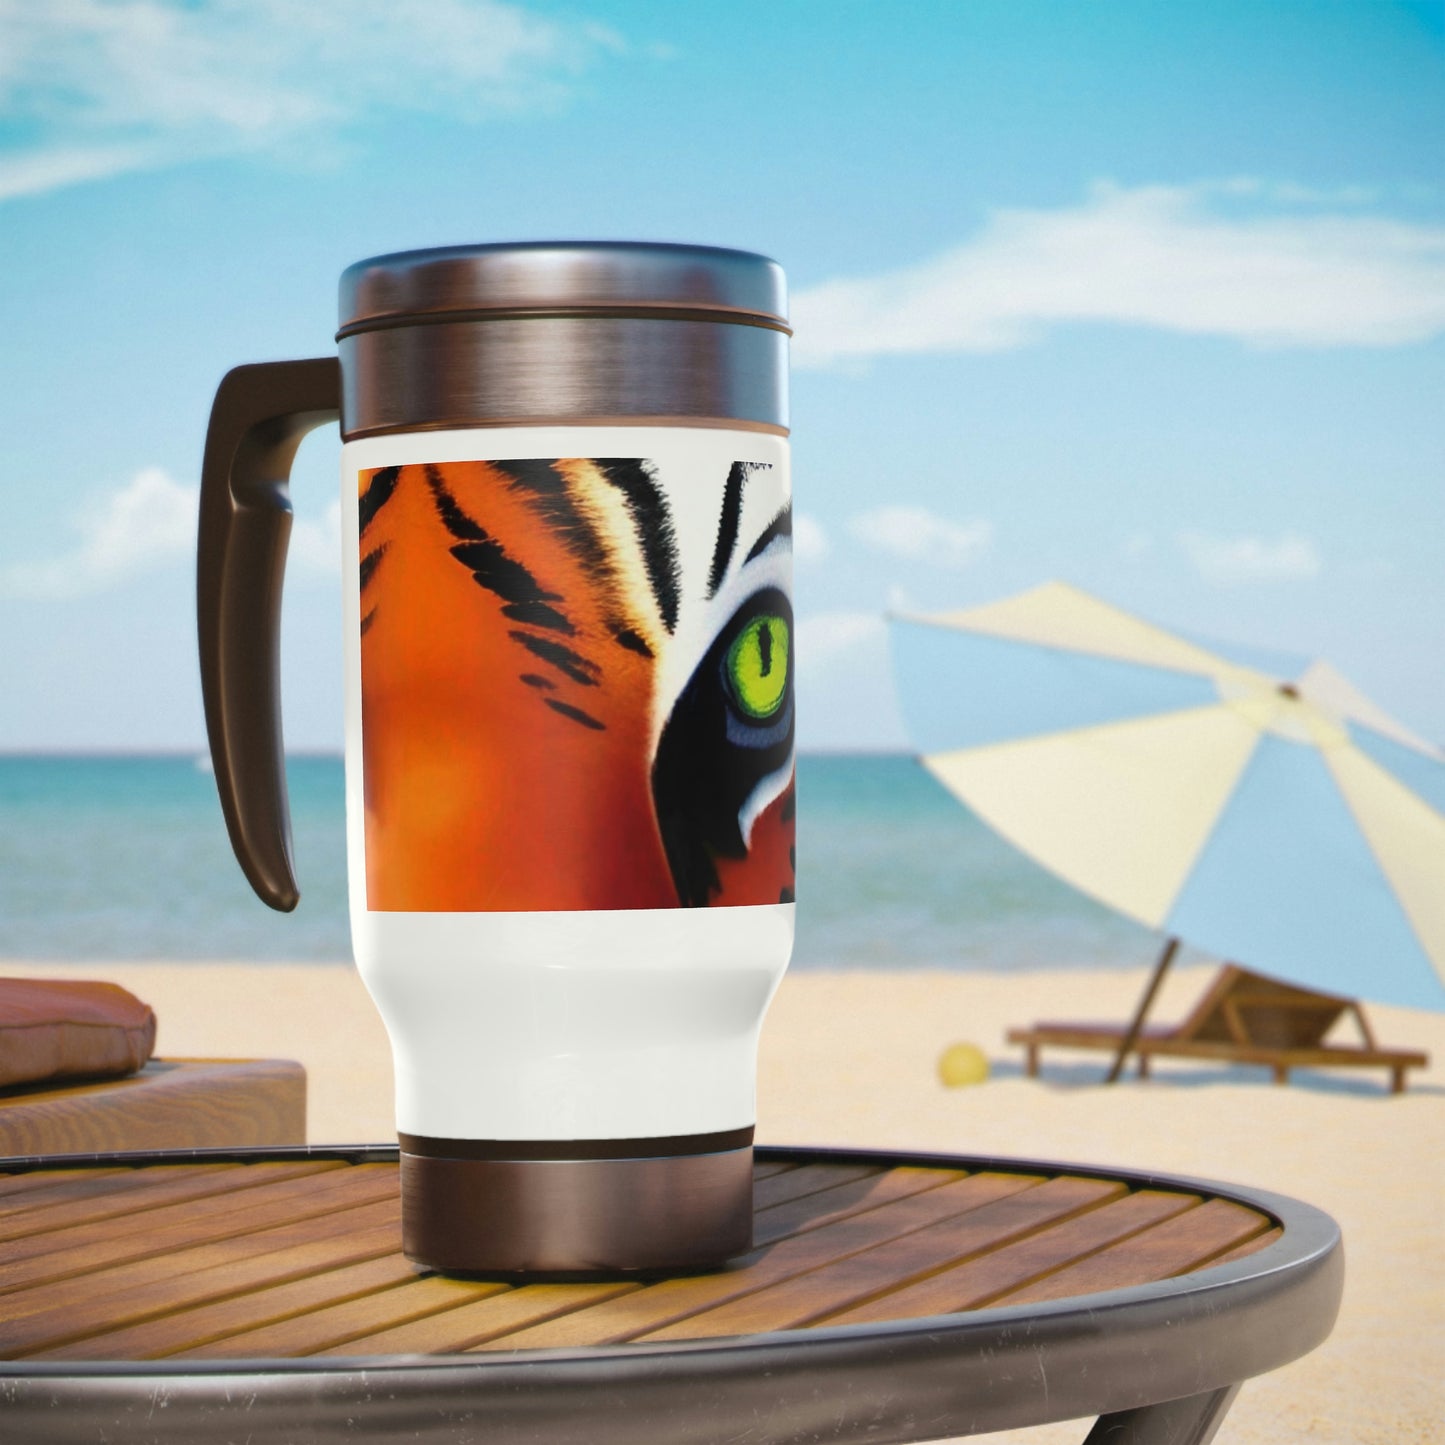 TIGER - Stainless Steel Travel Mug with Handle, 14oz